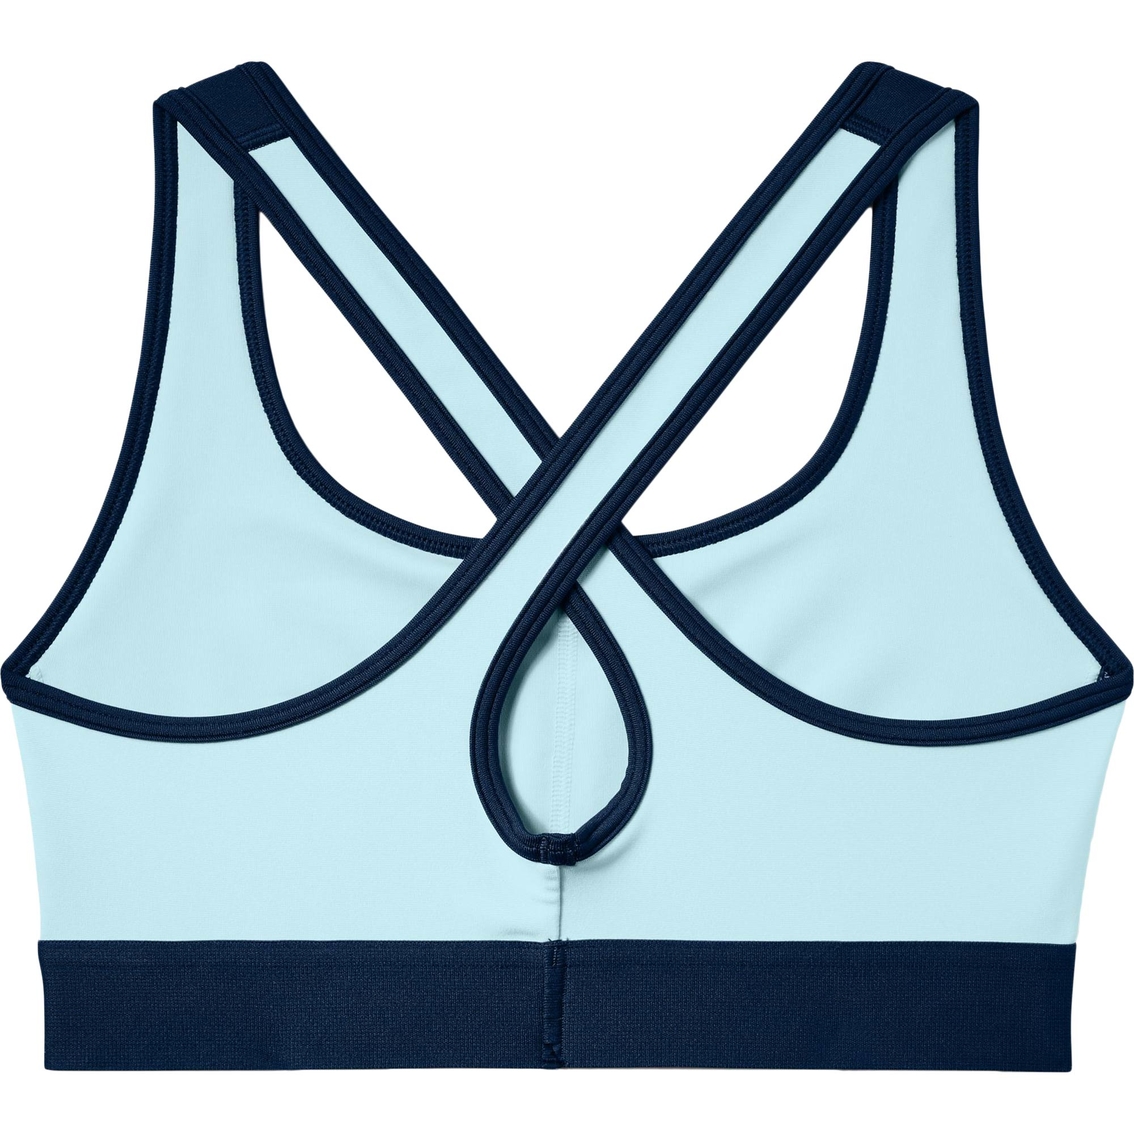 Under Armour Mid Crossback Sports Bra - Image 4 of 4